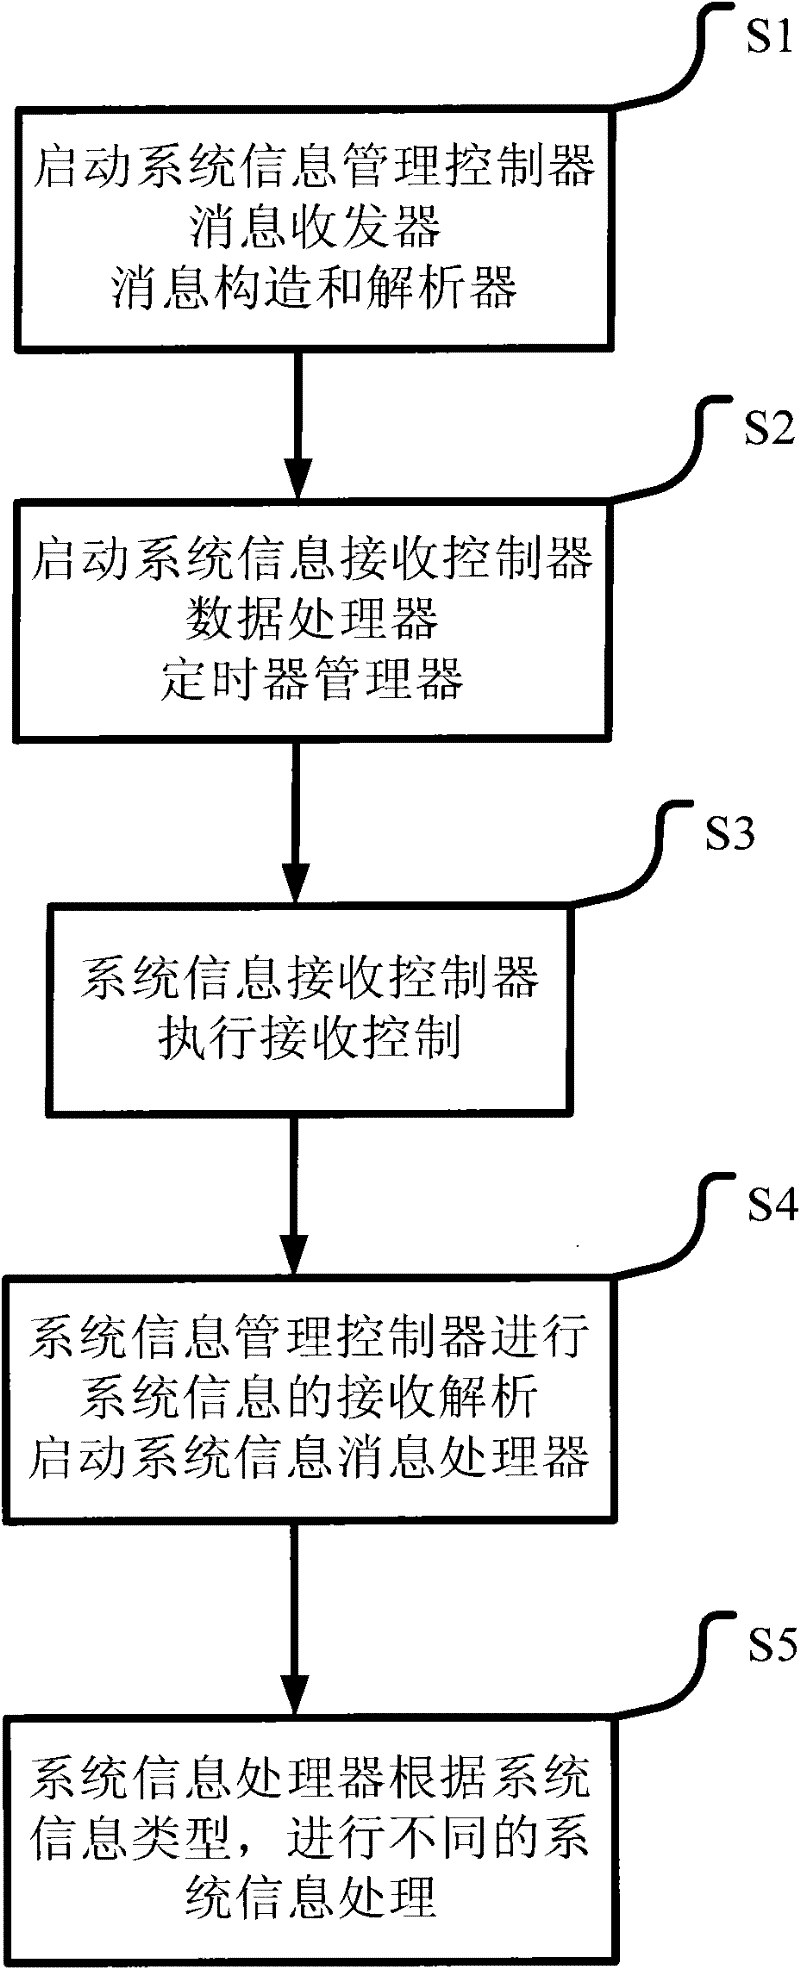 System information managing method and device in LTE (Long Term Evolution) system